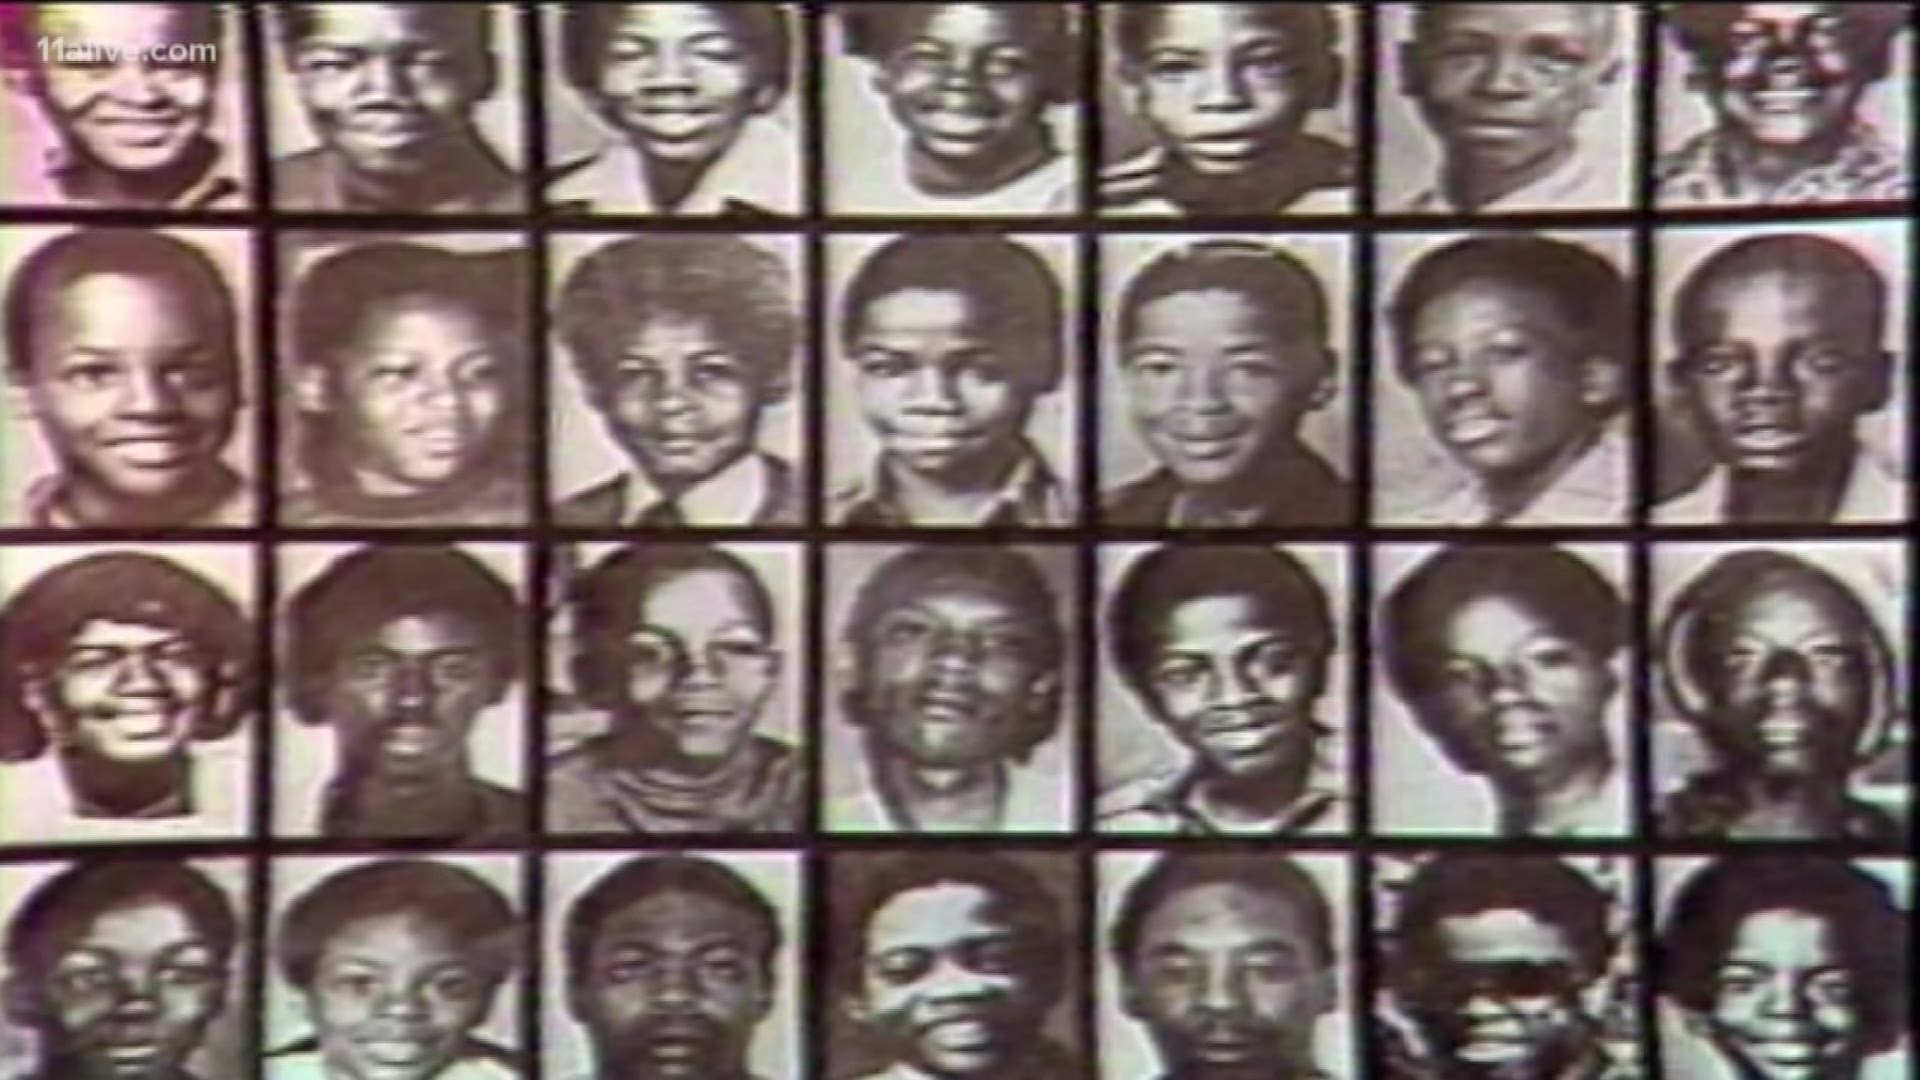 The cases, infamously known as the "Atlanta child murders," are still debated to this day – along with the question of whether Williams was really the man responsible for killing 29 children.